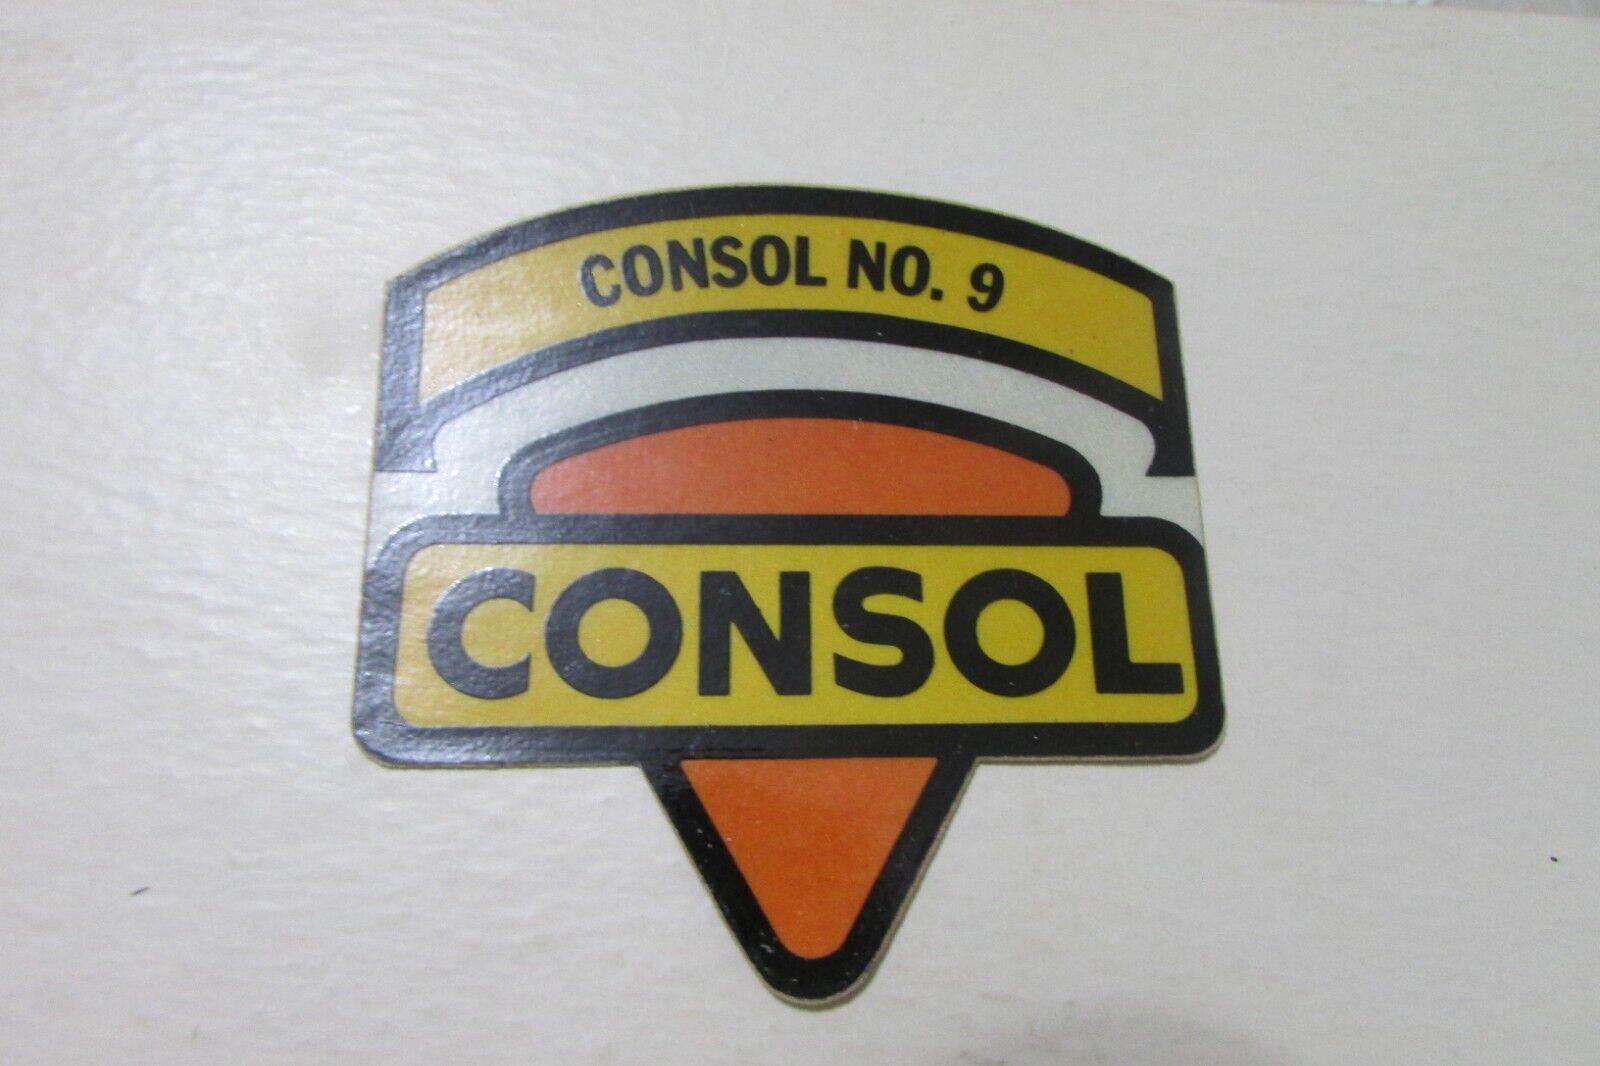 NICE OLDER 1st PRINTING SHIELD CONSOL 9 CONSOL COAL CO. COAL MINING STICKER